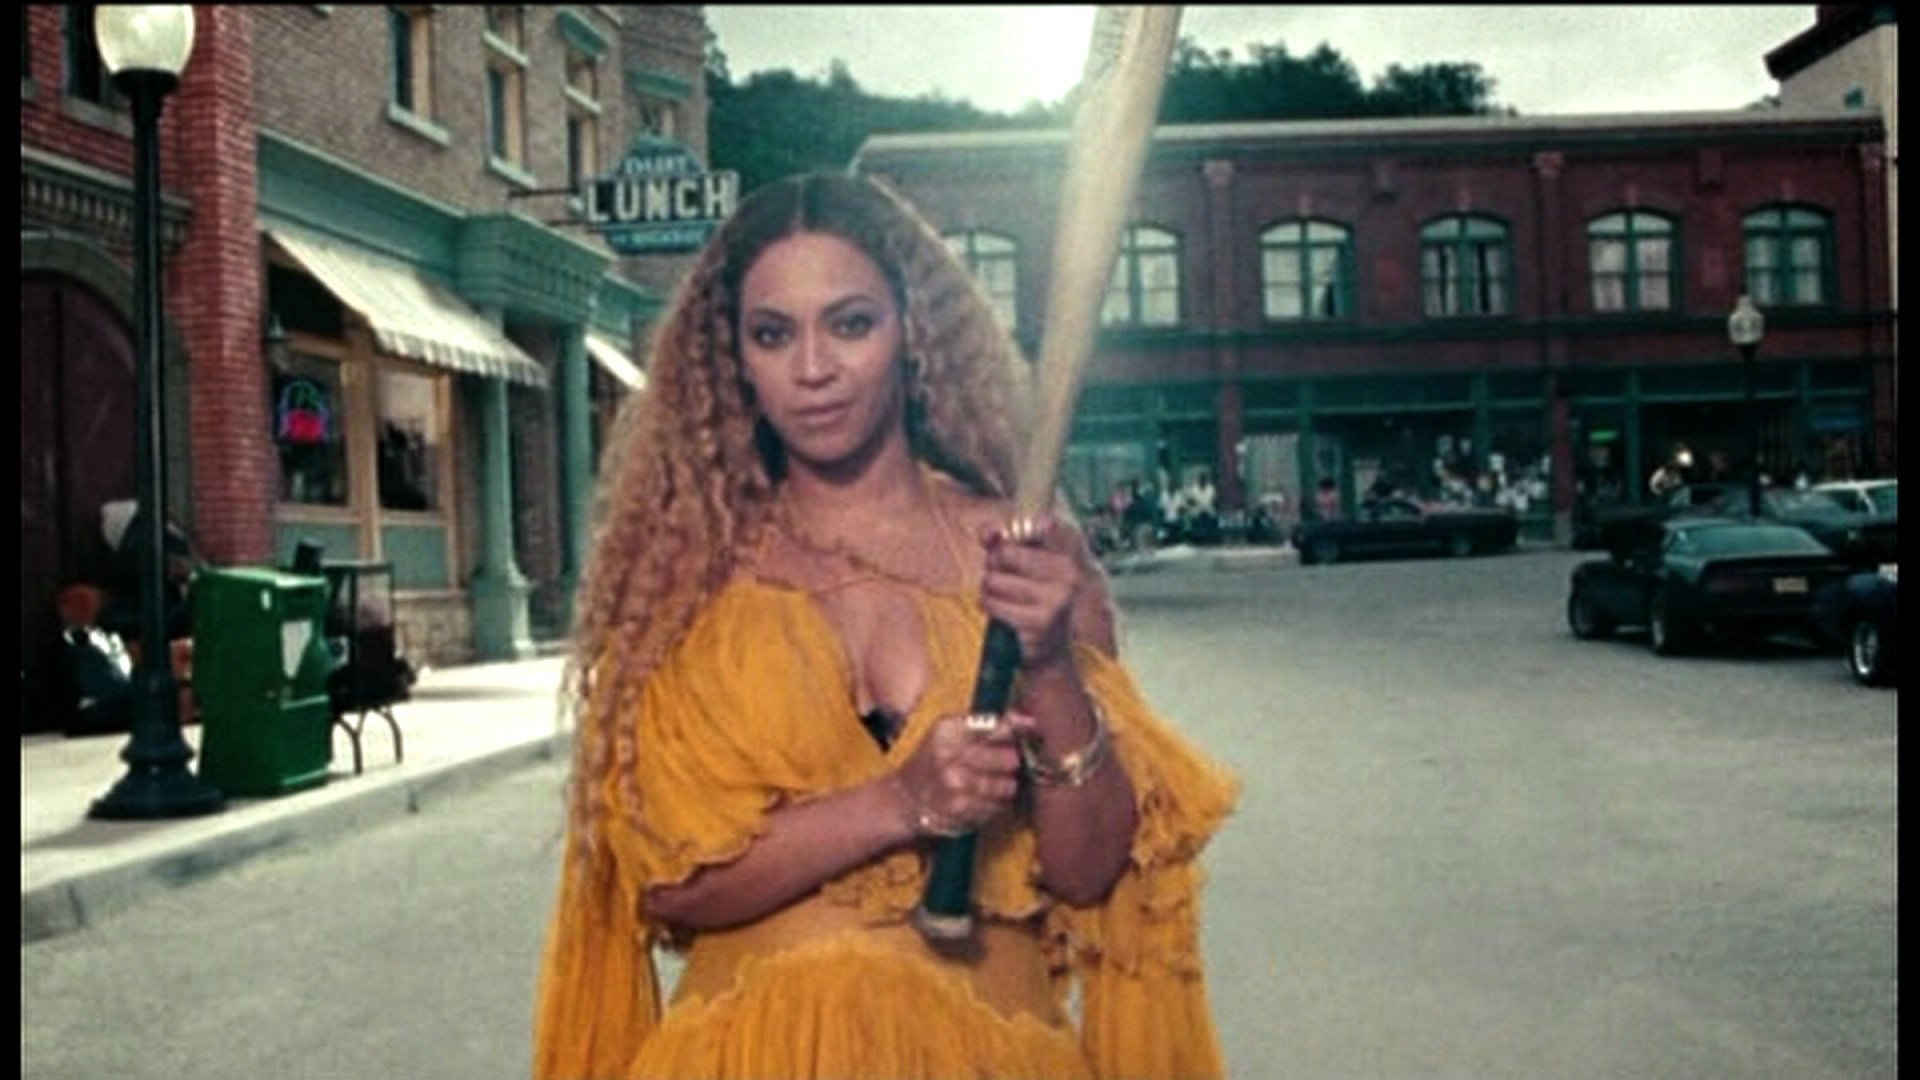 Beyonce debuted 'Lemonade' on HBO, released album of the same name on April 23, 2016.